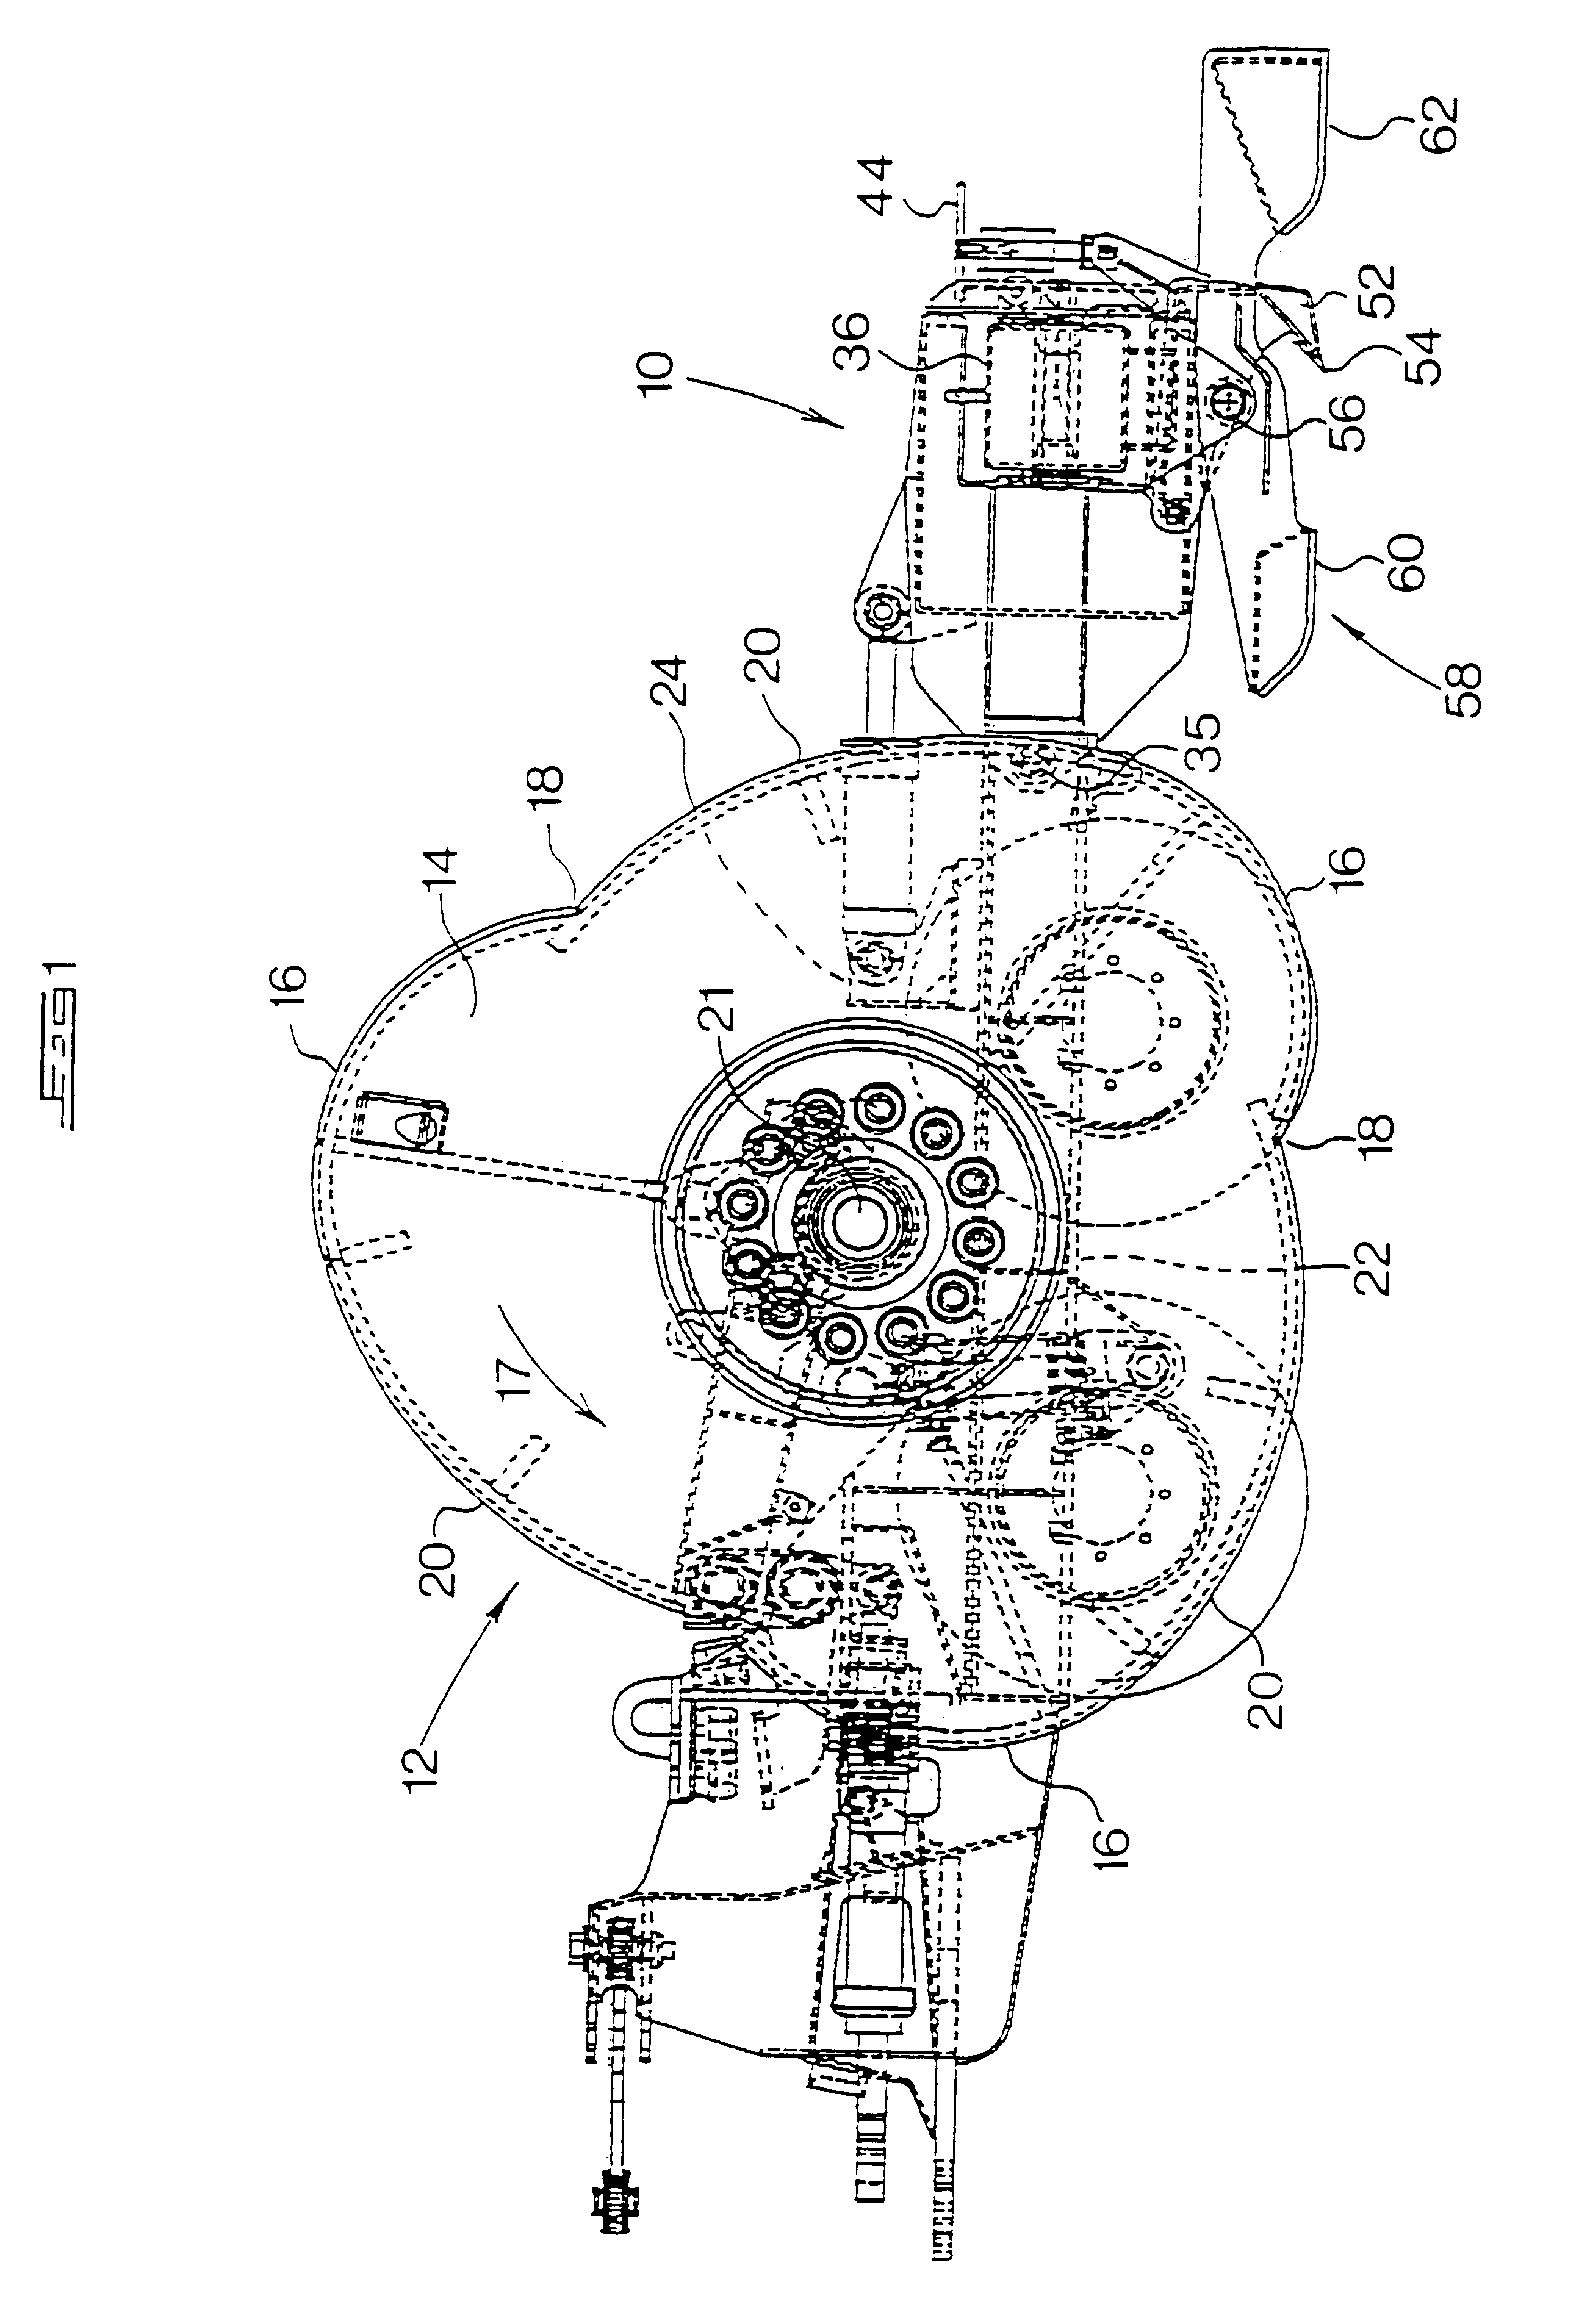 Soil levelling device